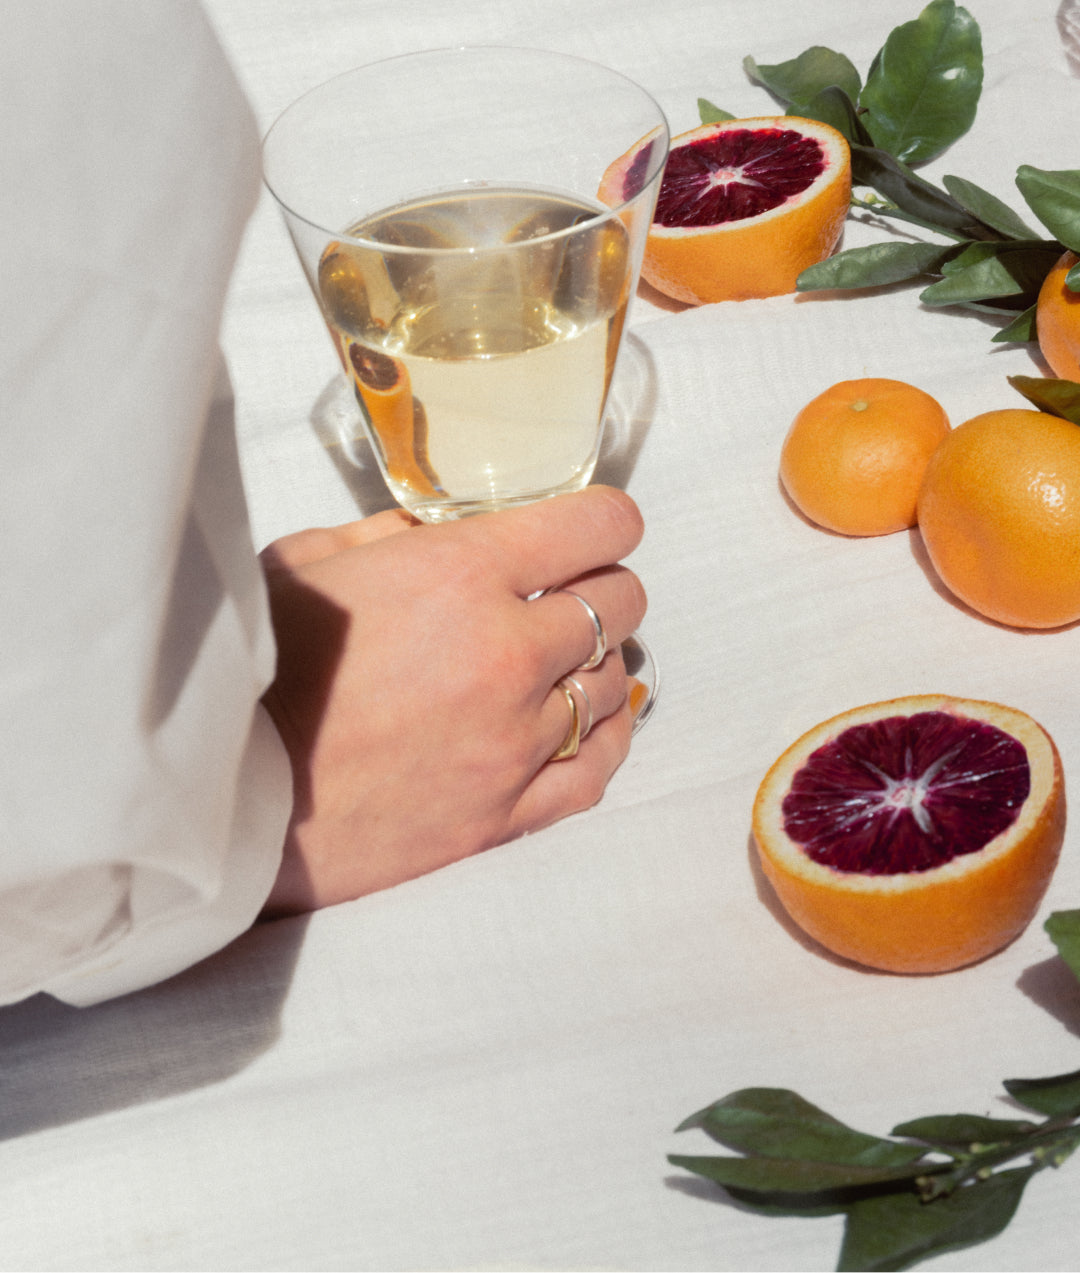 An image of a woman's hand holding a glass of white wine outside on a blanket with oranges and greenery